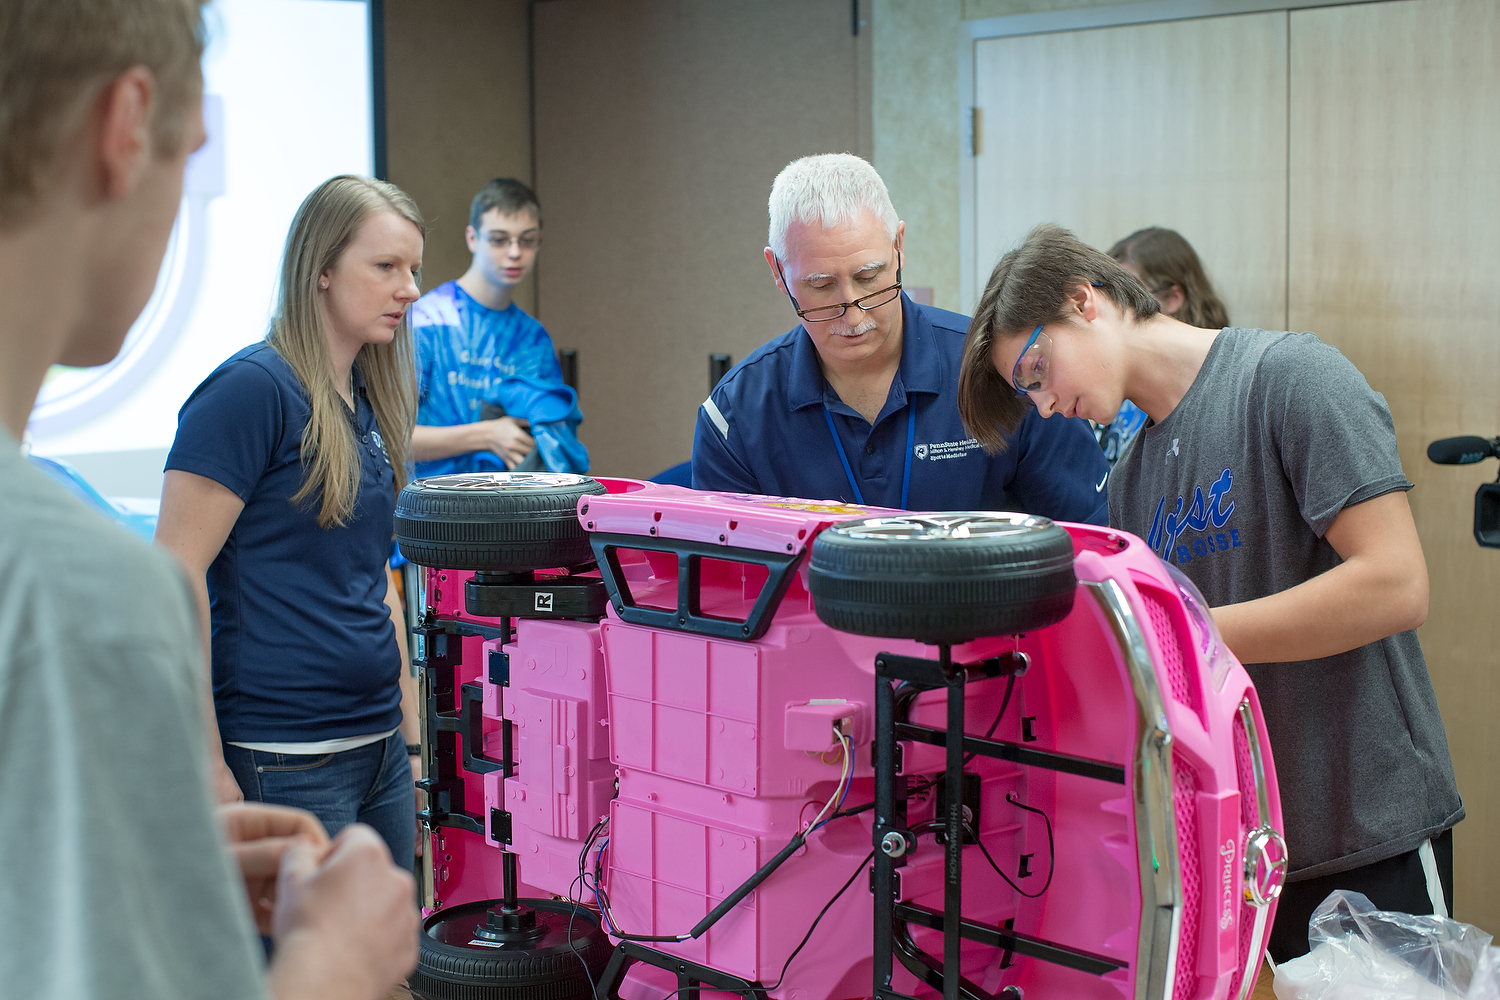 Three people work on a pink toy car, which is turned on its side and propped up on a table. Three other people stand nearby, looking on.